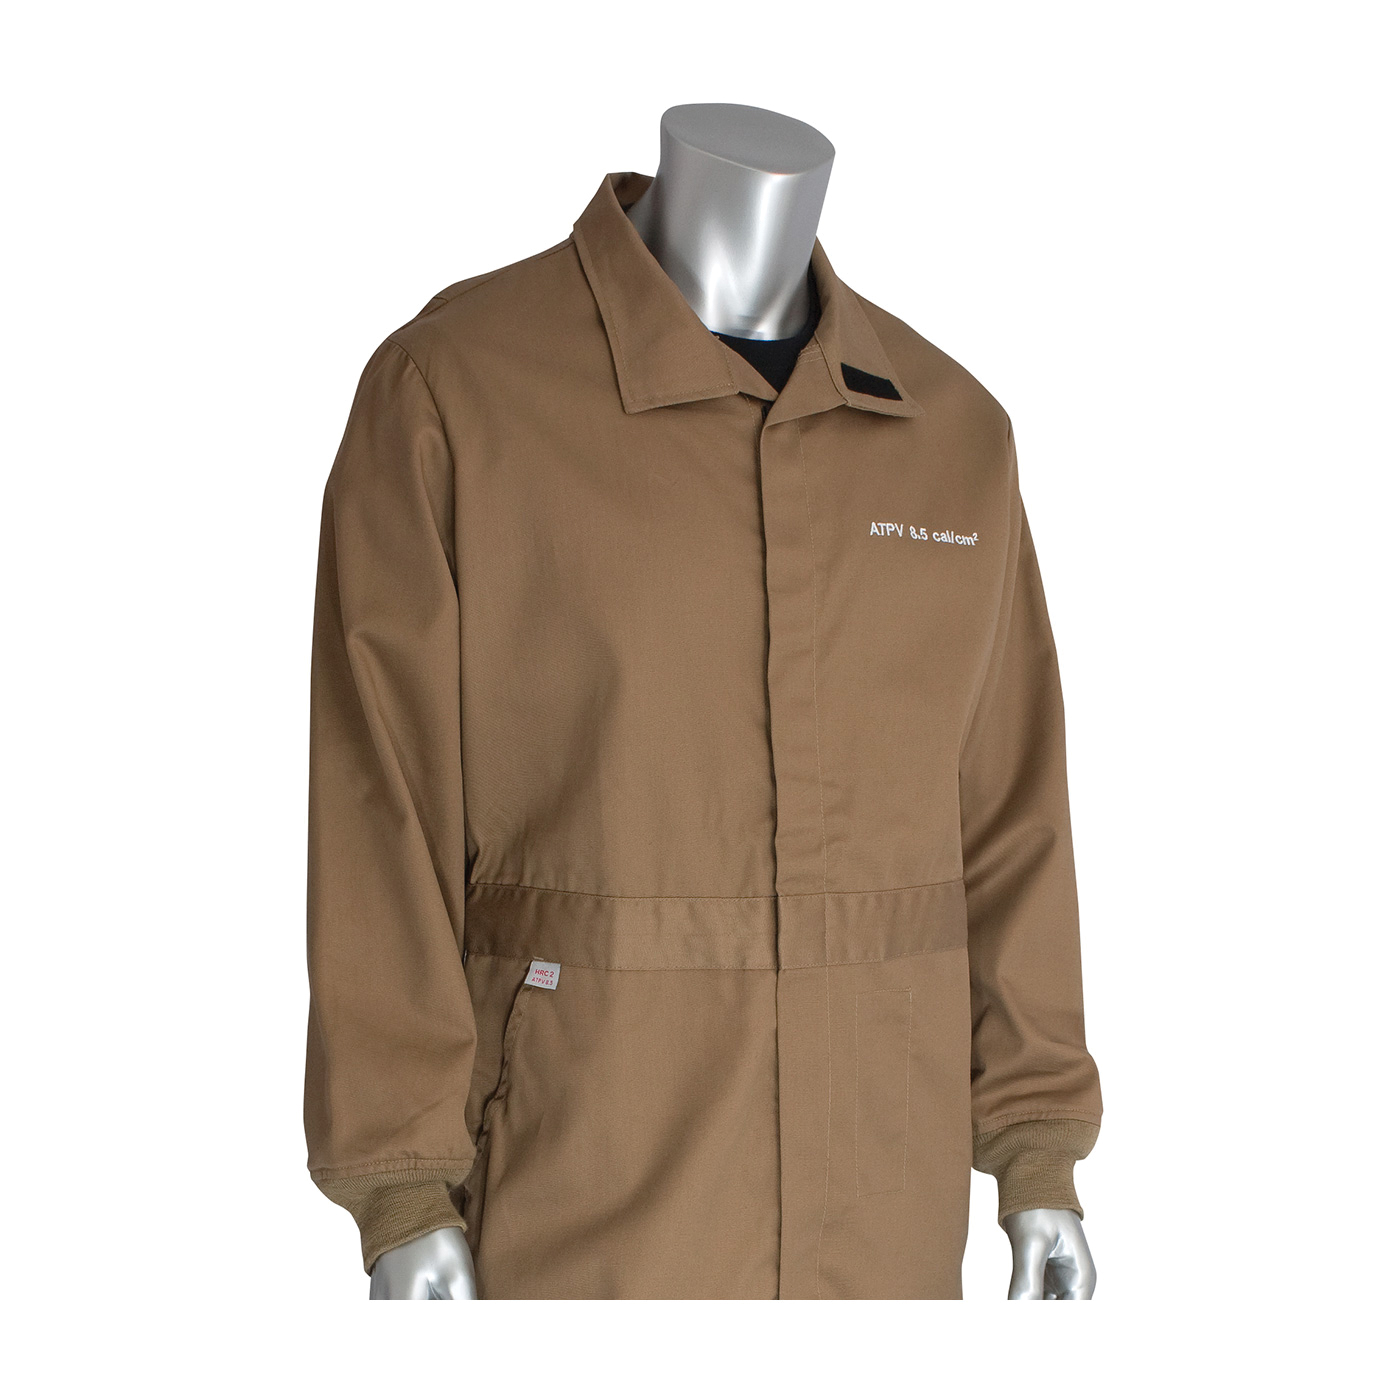 PIP® 9100-2110D/XL Flame Resistant Coverall With Insect Repellant, XL, Khaki, 90% Cotton/10% Nylon/FR and Bug Repellent Twill Weave, 48 to 50 in Chest, 32 in L Inseam